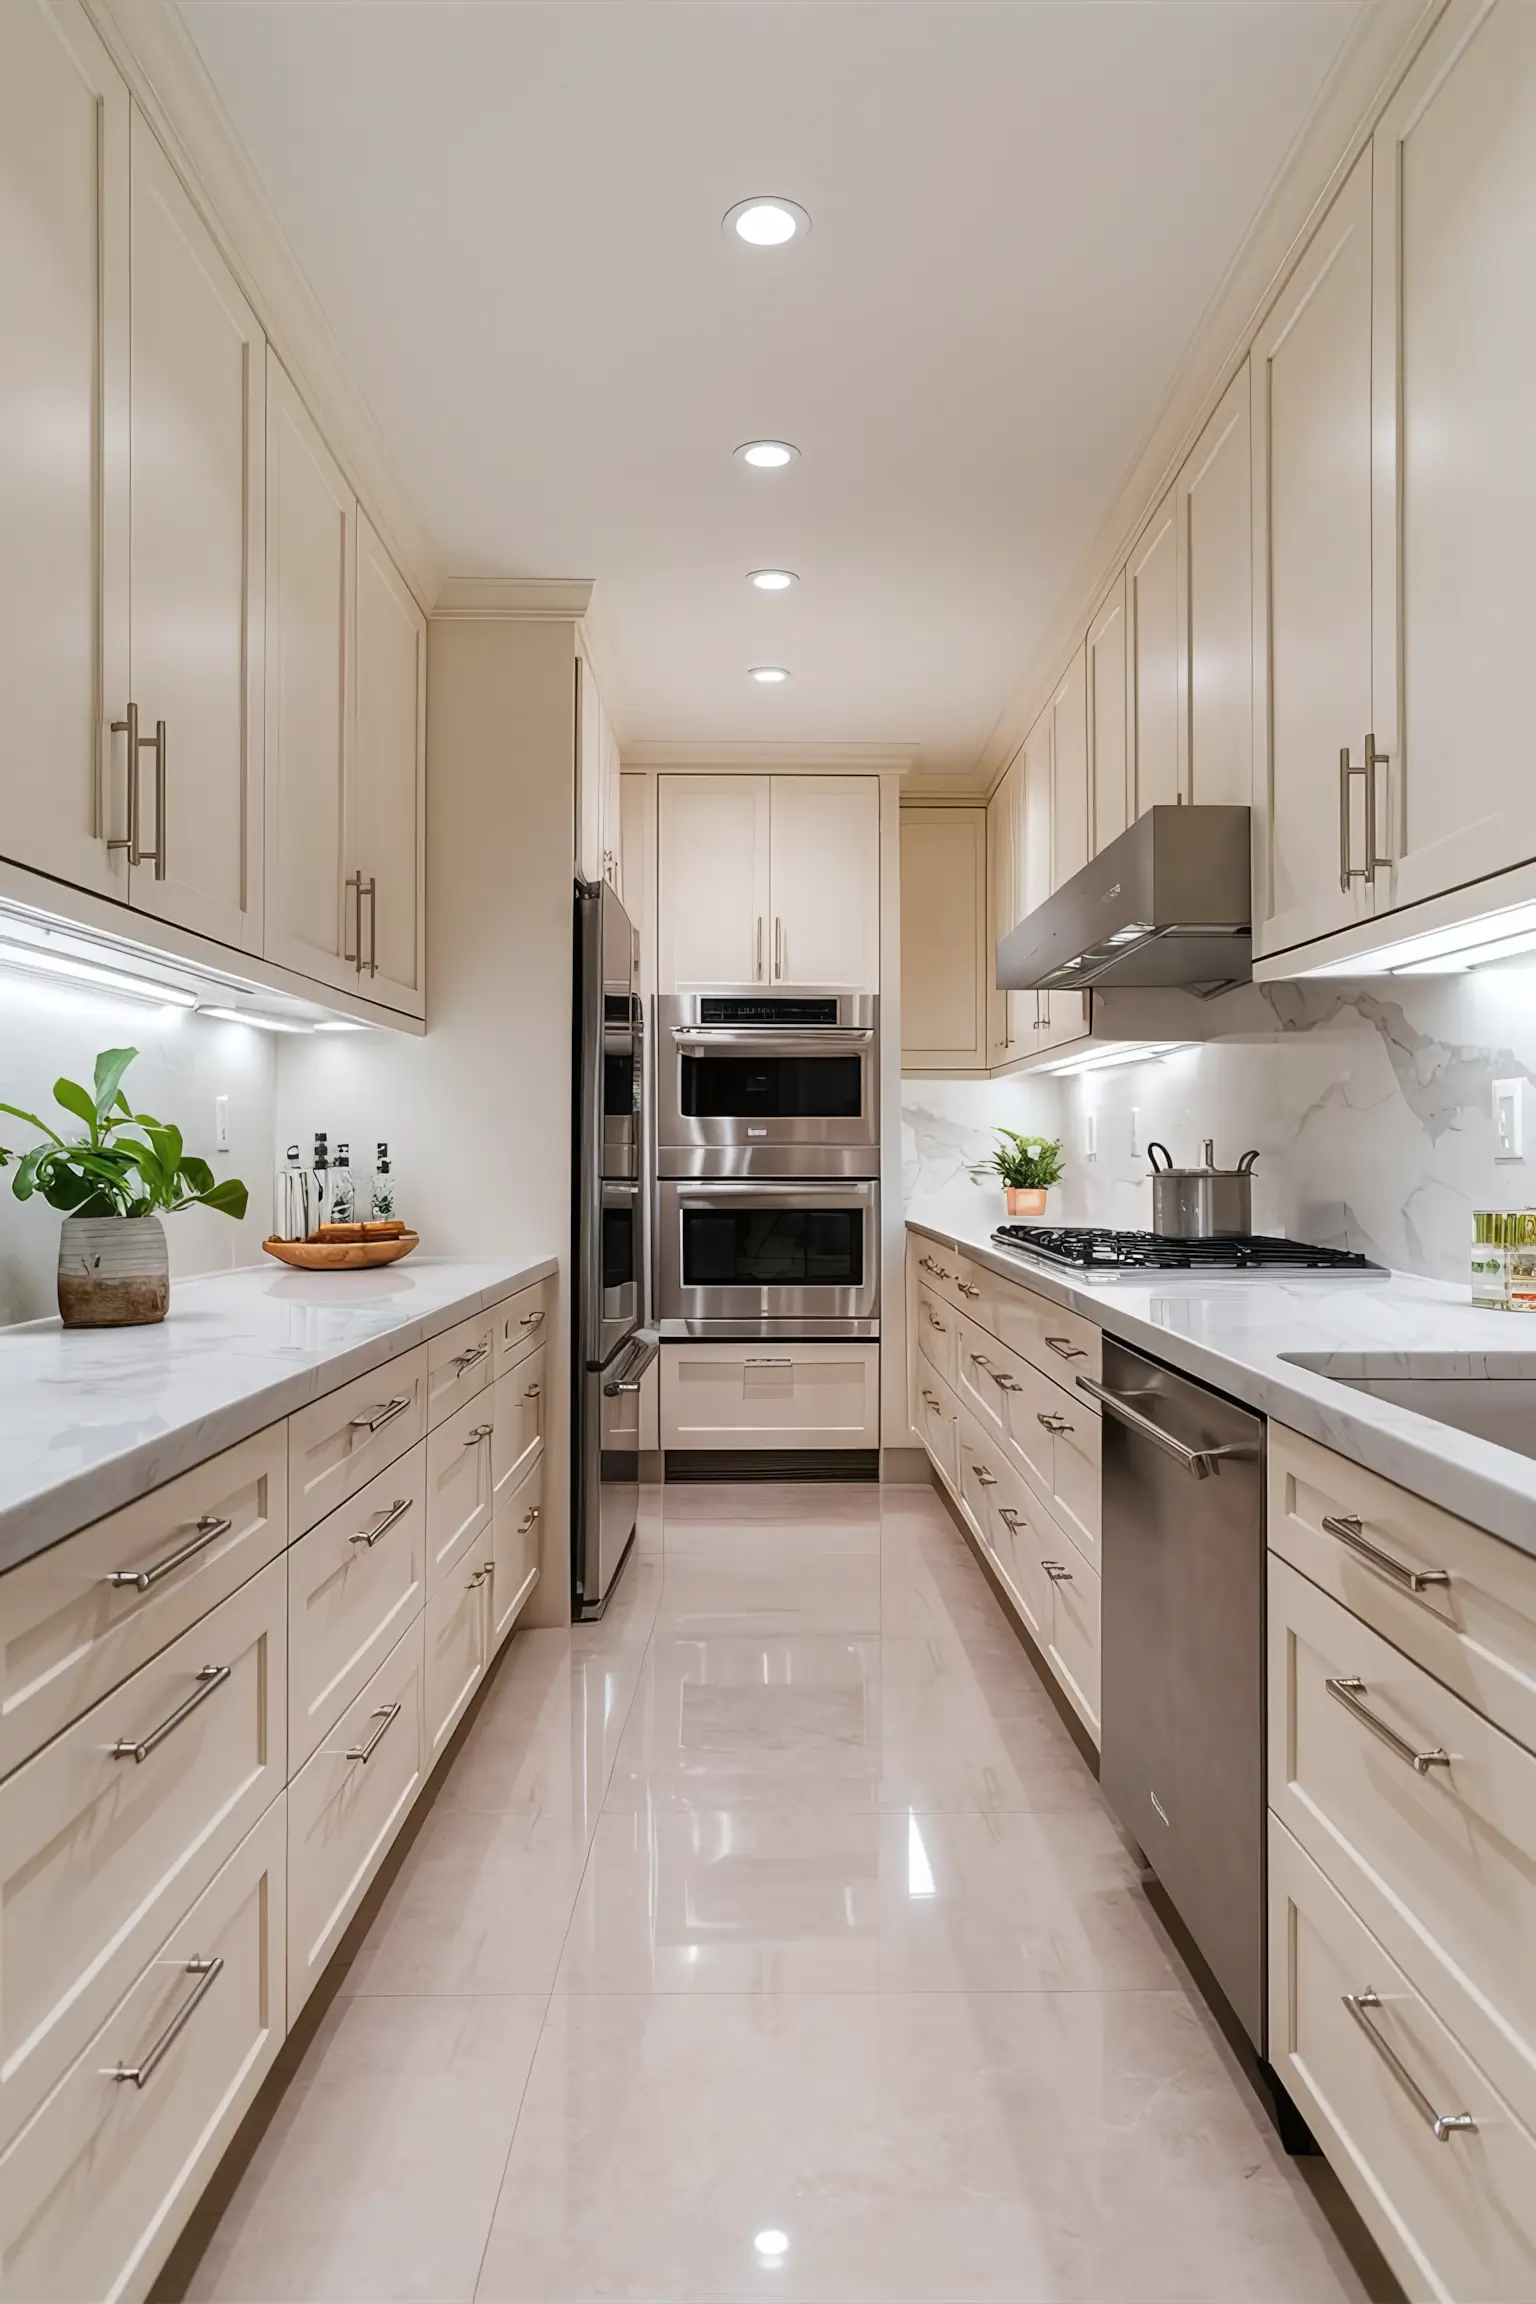 Kitchen with elegant white cabinets, marble countertops, and stainless steel appliances.